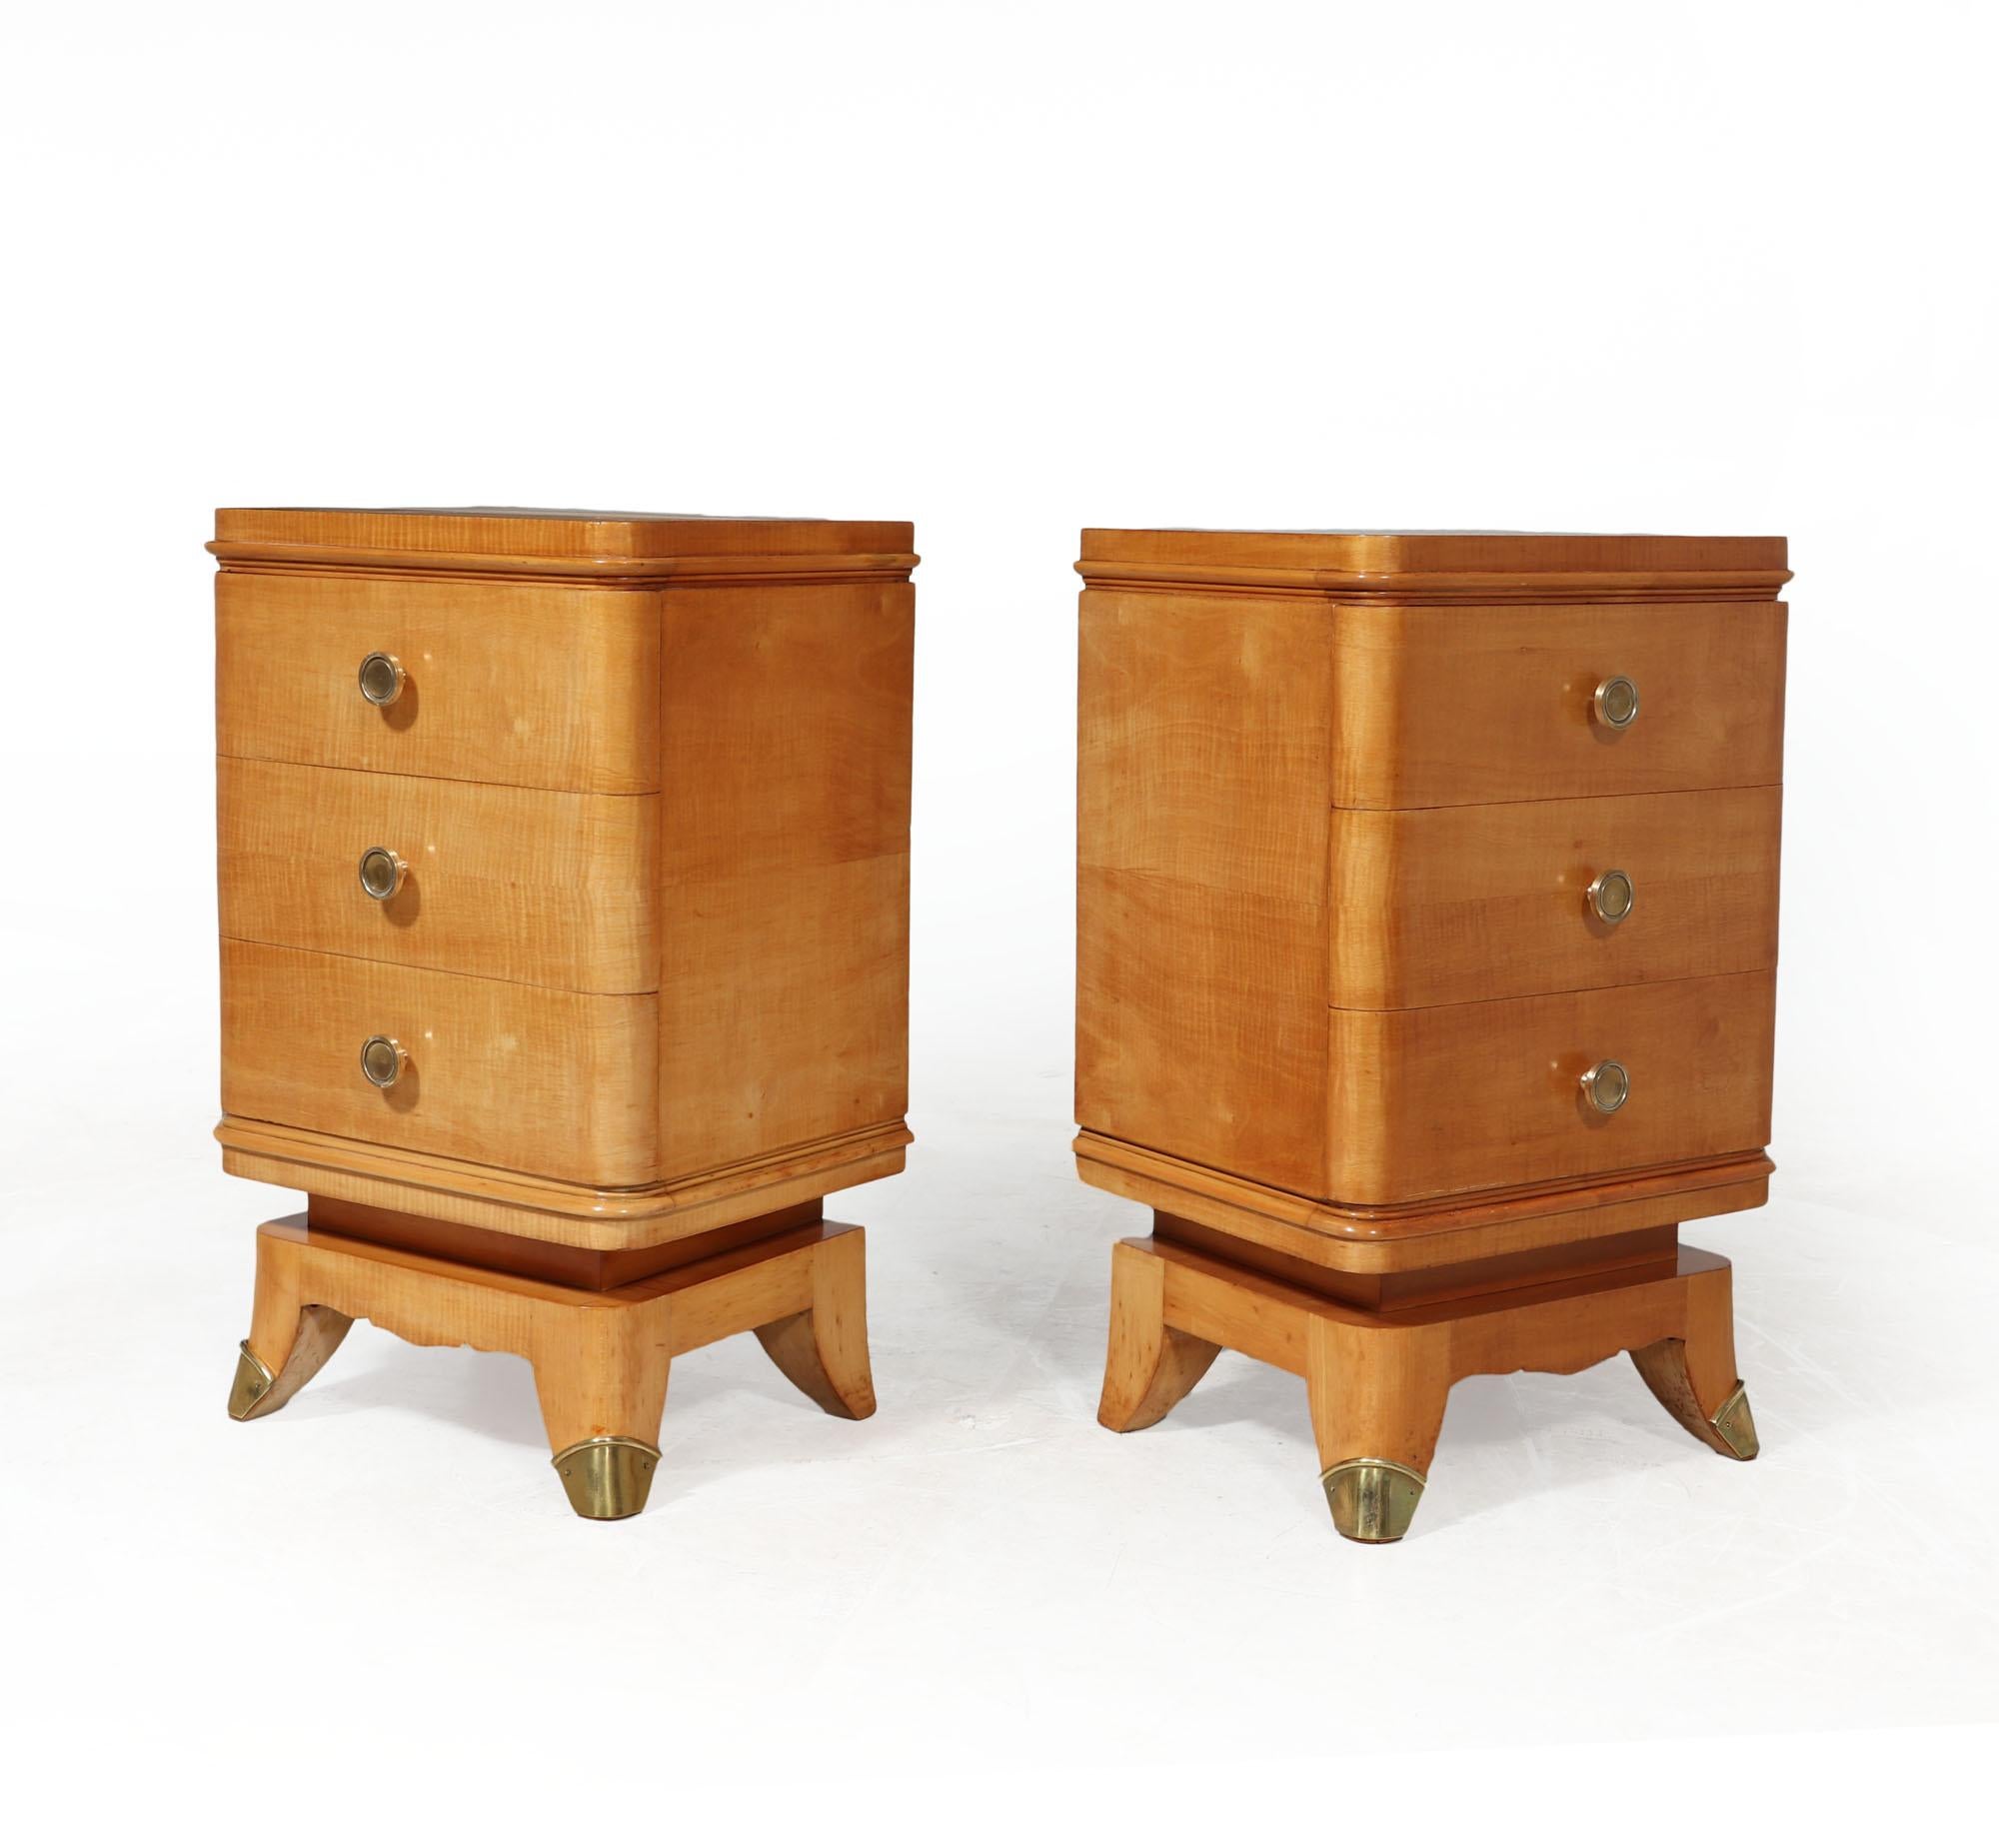 PAIR OF ART DECO BEDSIDE CHESTS 
An exceptional quality pair of three drawer bedside chest of drawers each having three drawers rounded corners and beading detail and raised on a short sabre for legged base with brass sabots The chests have been